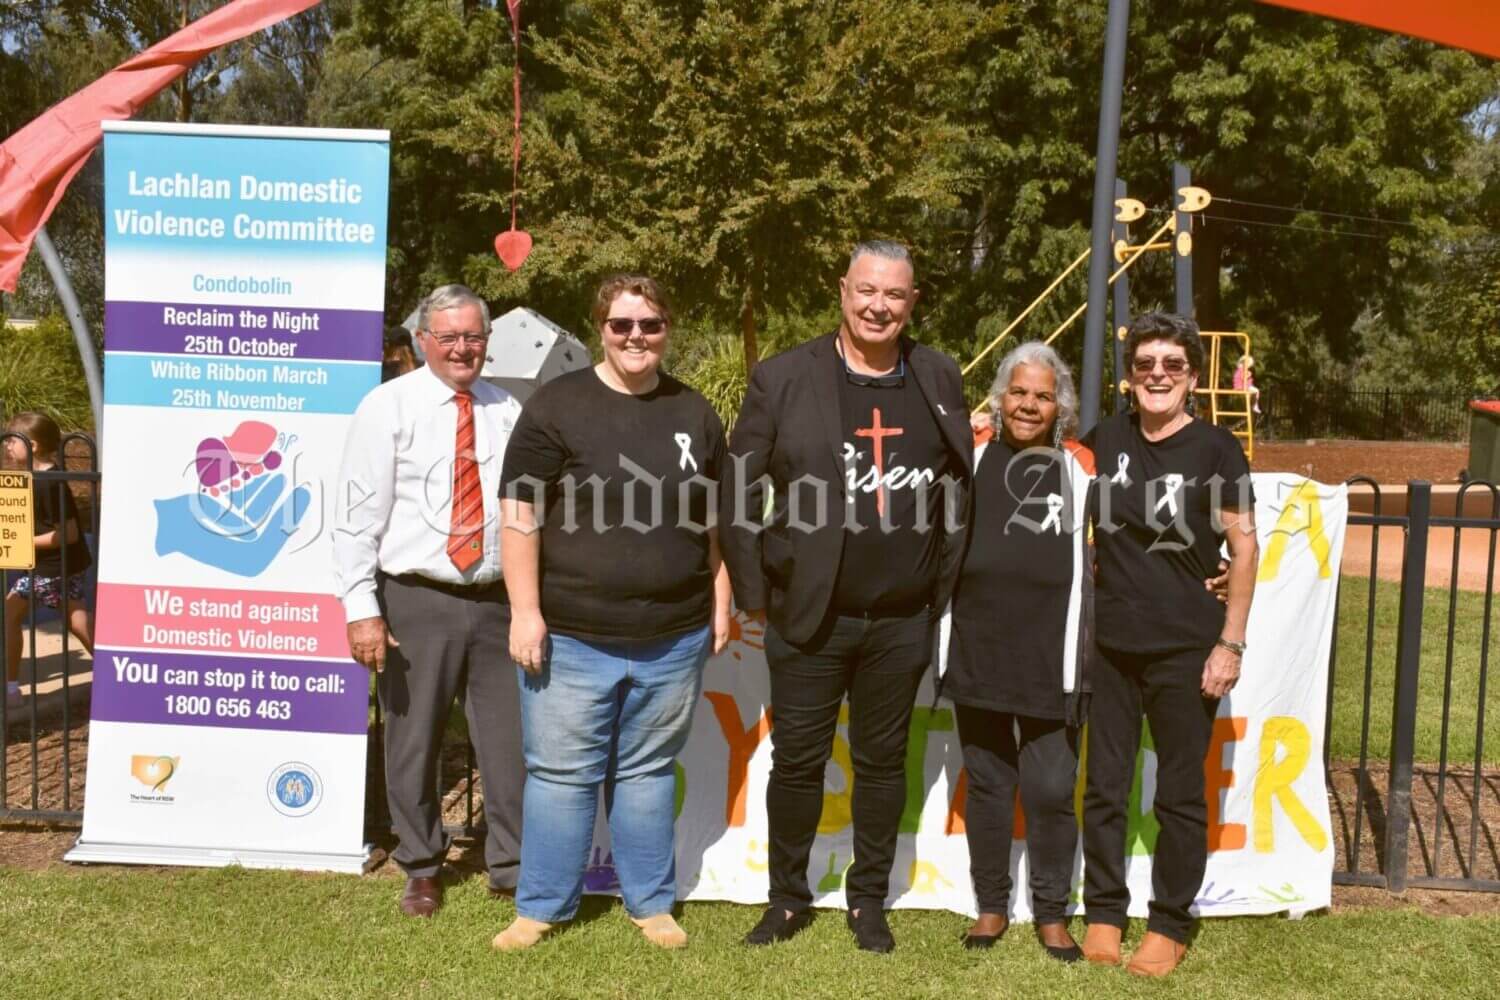 Lachlan Shire Mayor John Medcalf OAM, Central West Family Support Group Inc Executive Officer Fiona Skipworth, White Ribbon Day March guest speaker Barry Merritt, Aunty Beryl Powell and Central West Family Support Group Inc Project Officer Heather Blackley. Image Credit: Melissa Blewitt.